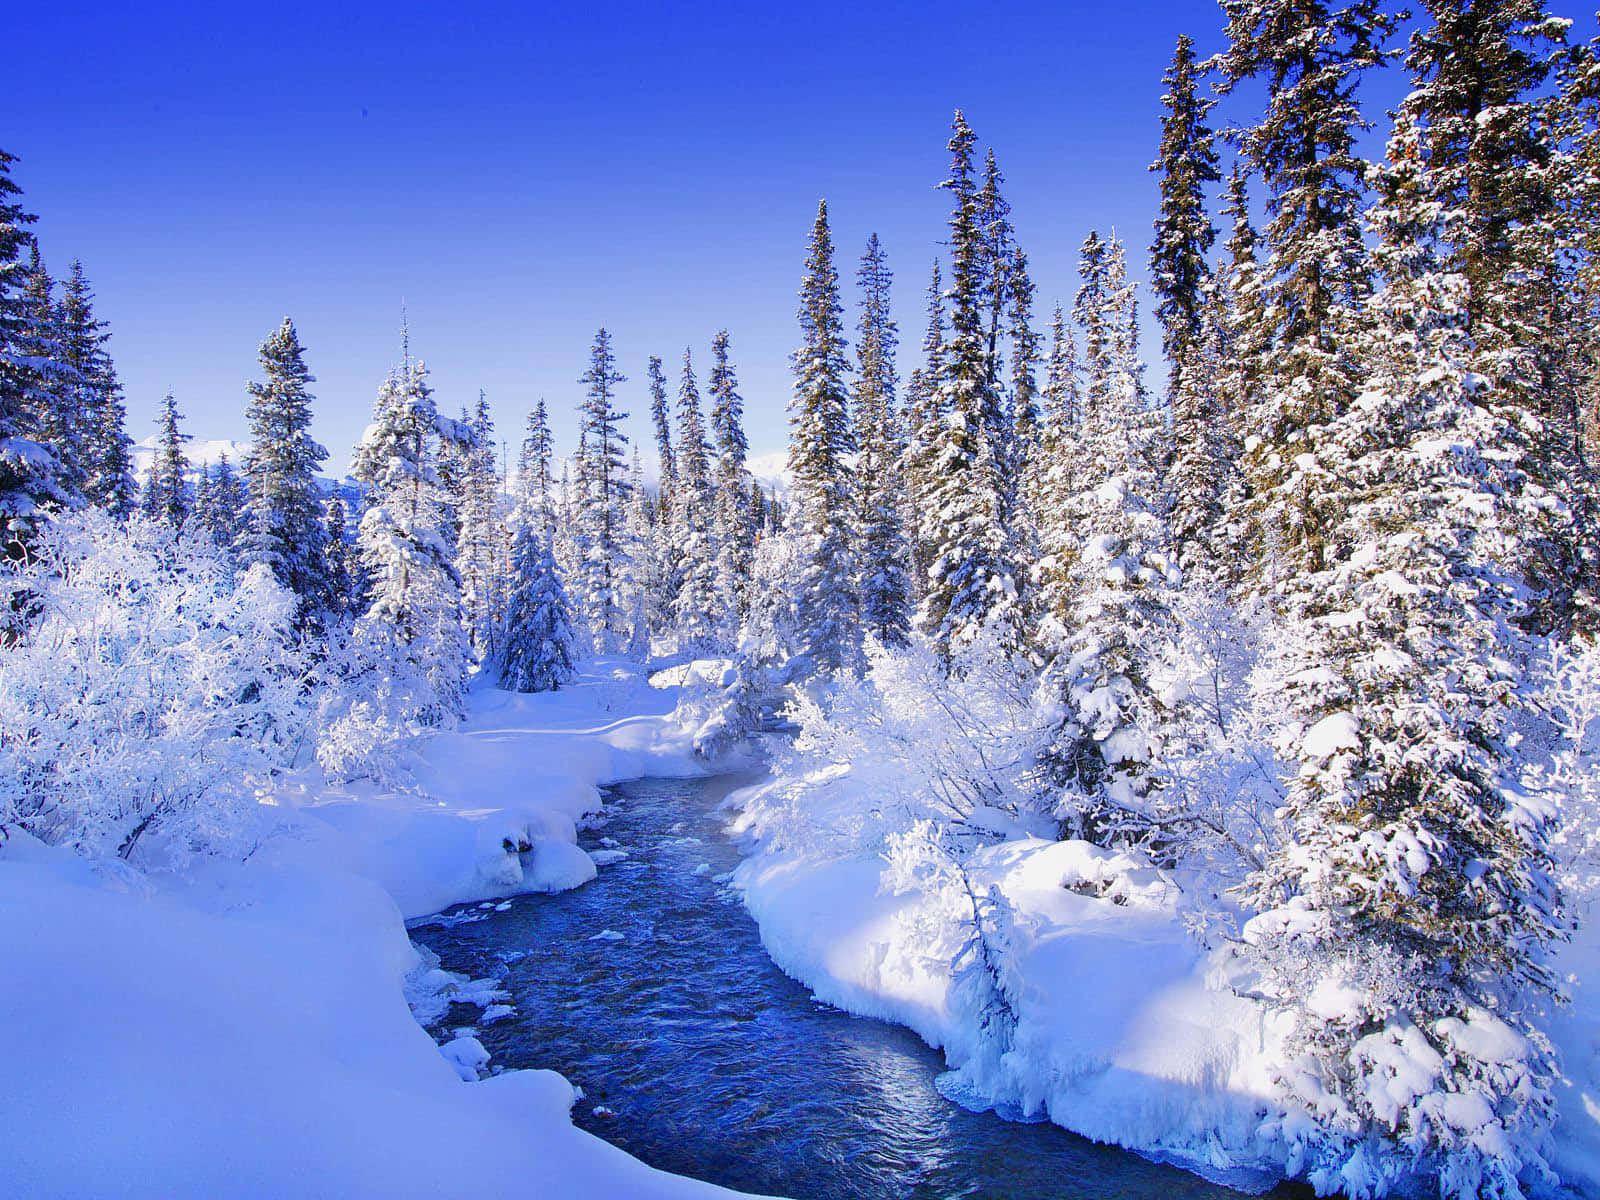 A Snow Covered Stream In The Forest